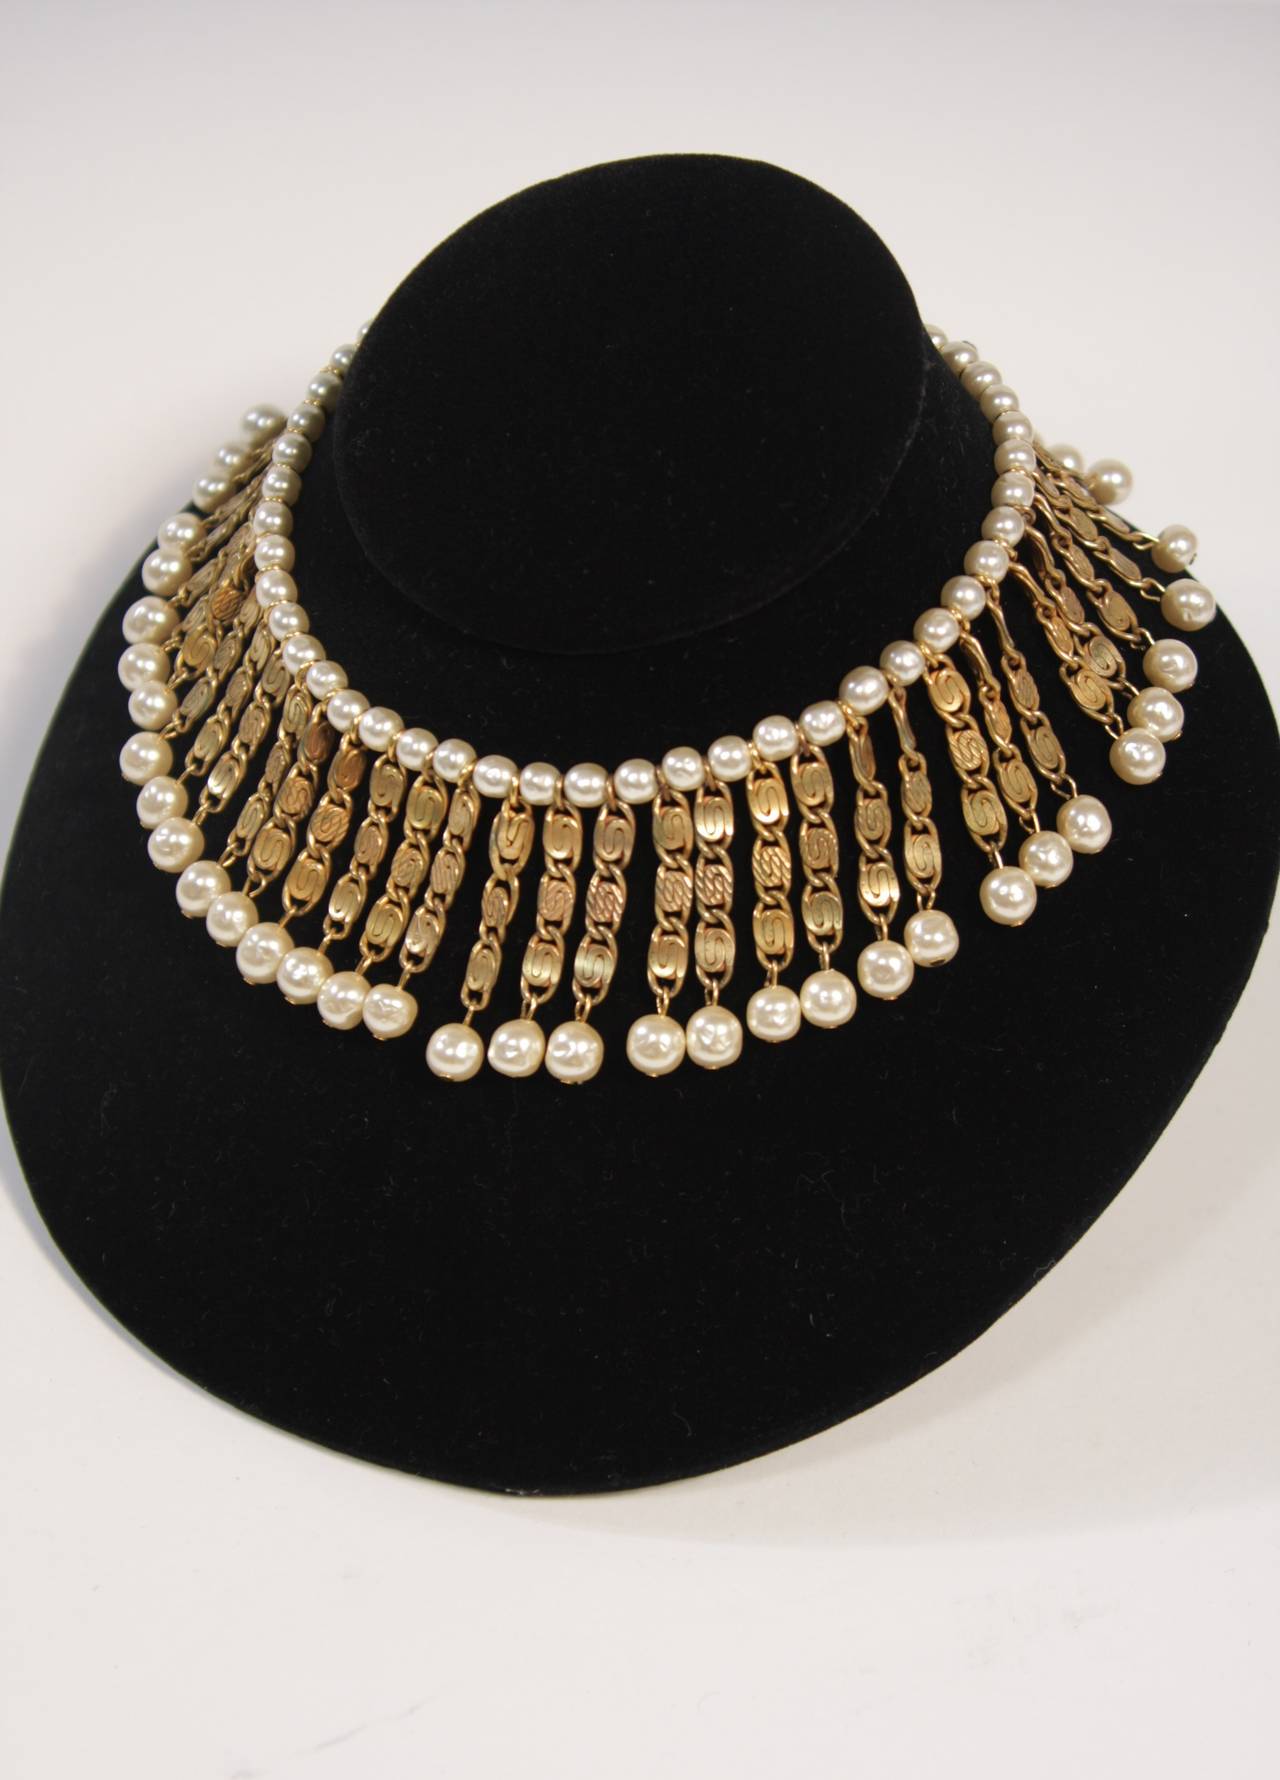 This Miriam Haskell chic bib style choker is composed of gold toned metal linked swirls and faux pearl accents. Features an adjustable length closure and is signed,
Miriam Haskell 

Measures (Approximately)
Length: 12